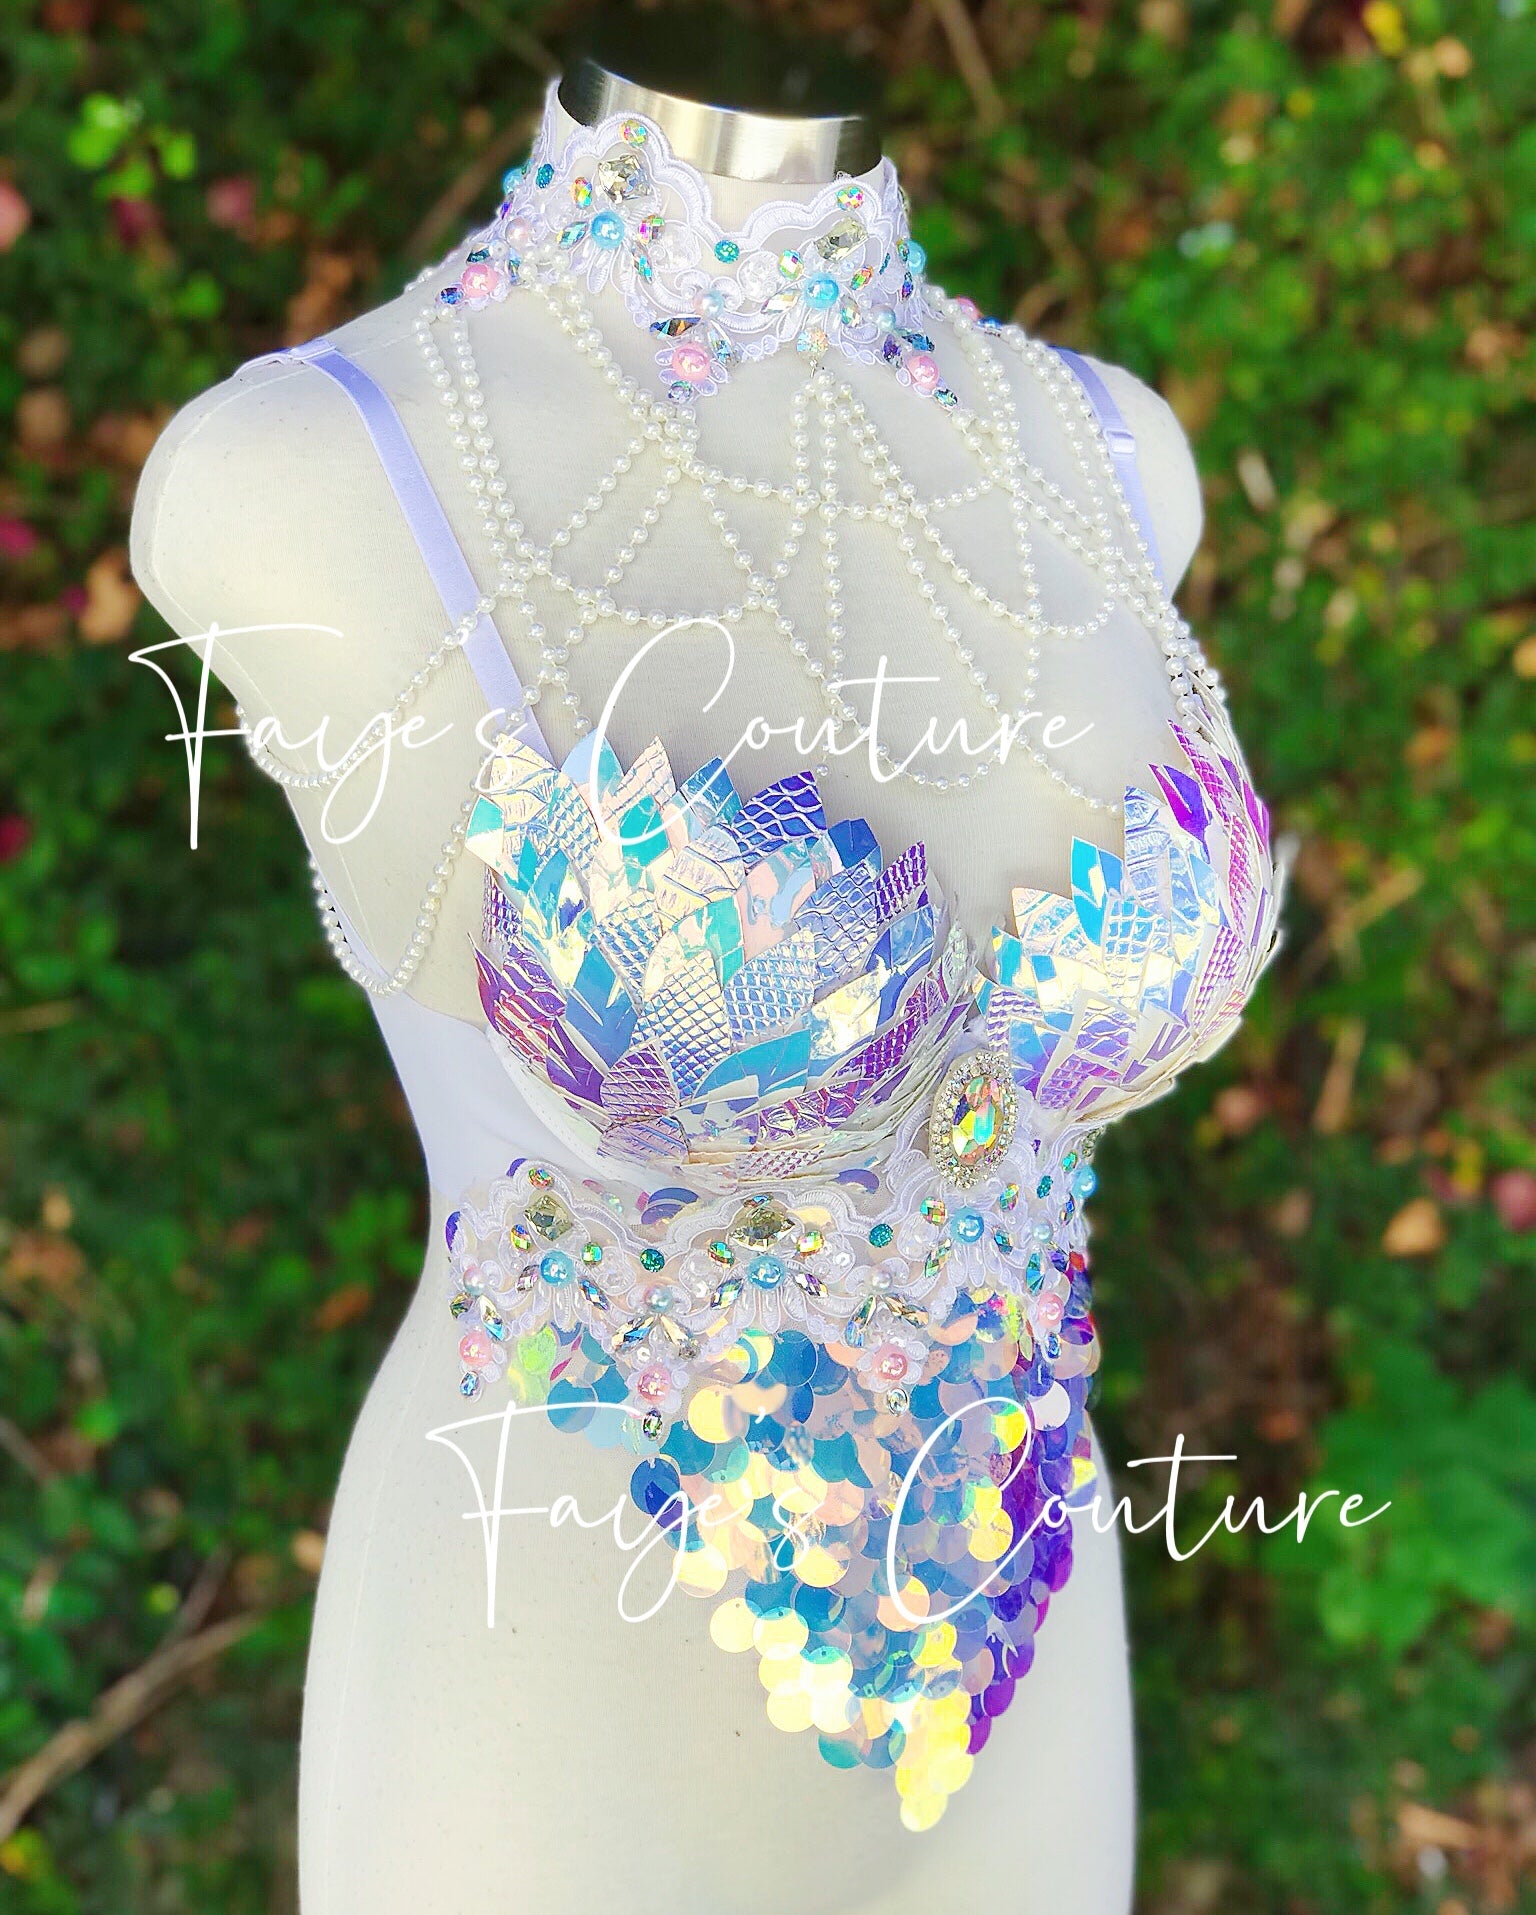 Iridescent Mesh Rave Outfit White & Pink Bralette / High Waist Panty /  Iridescent Trim / Bridal / Lingerie /kawaii / Pastel -  Canada